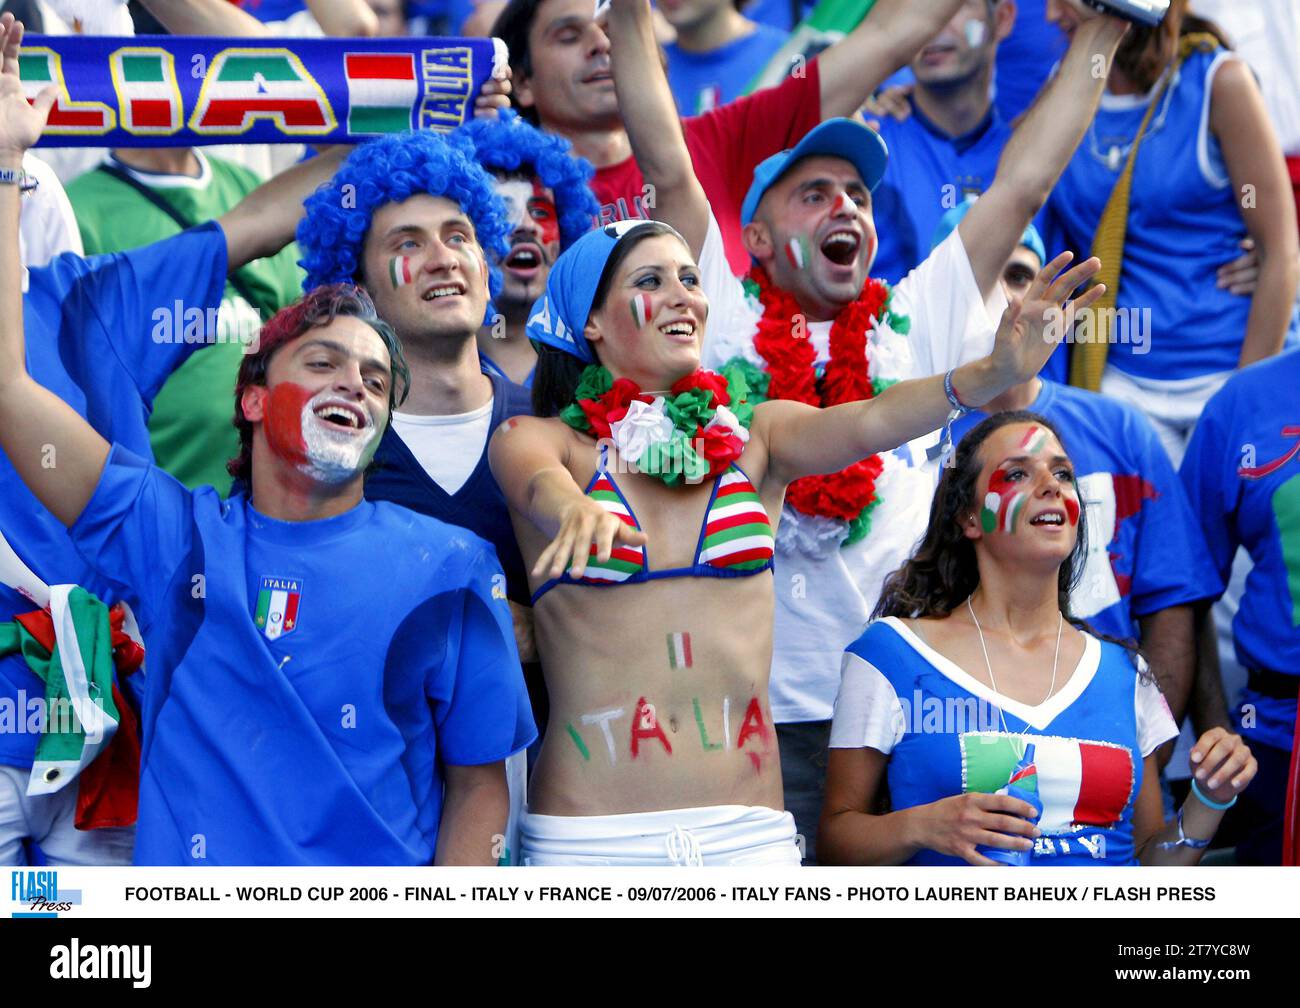 FOOTBALL - WORLD CUP 2006 - FINAL - ITALY v FRANCE - 09/07/2006 - ITALY FANS - PHOTO LAURENT BAHEUX / FLASH PRESS Stock Photo